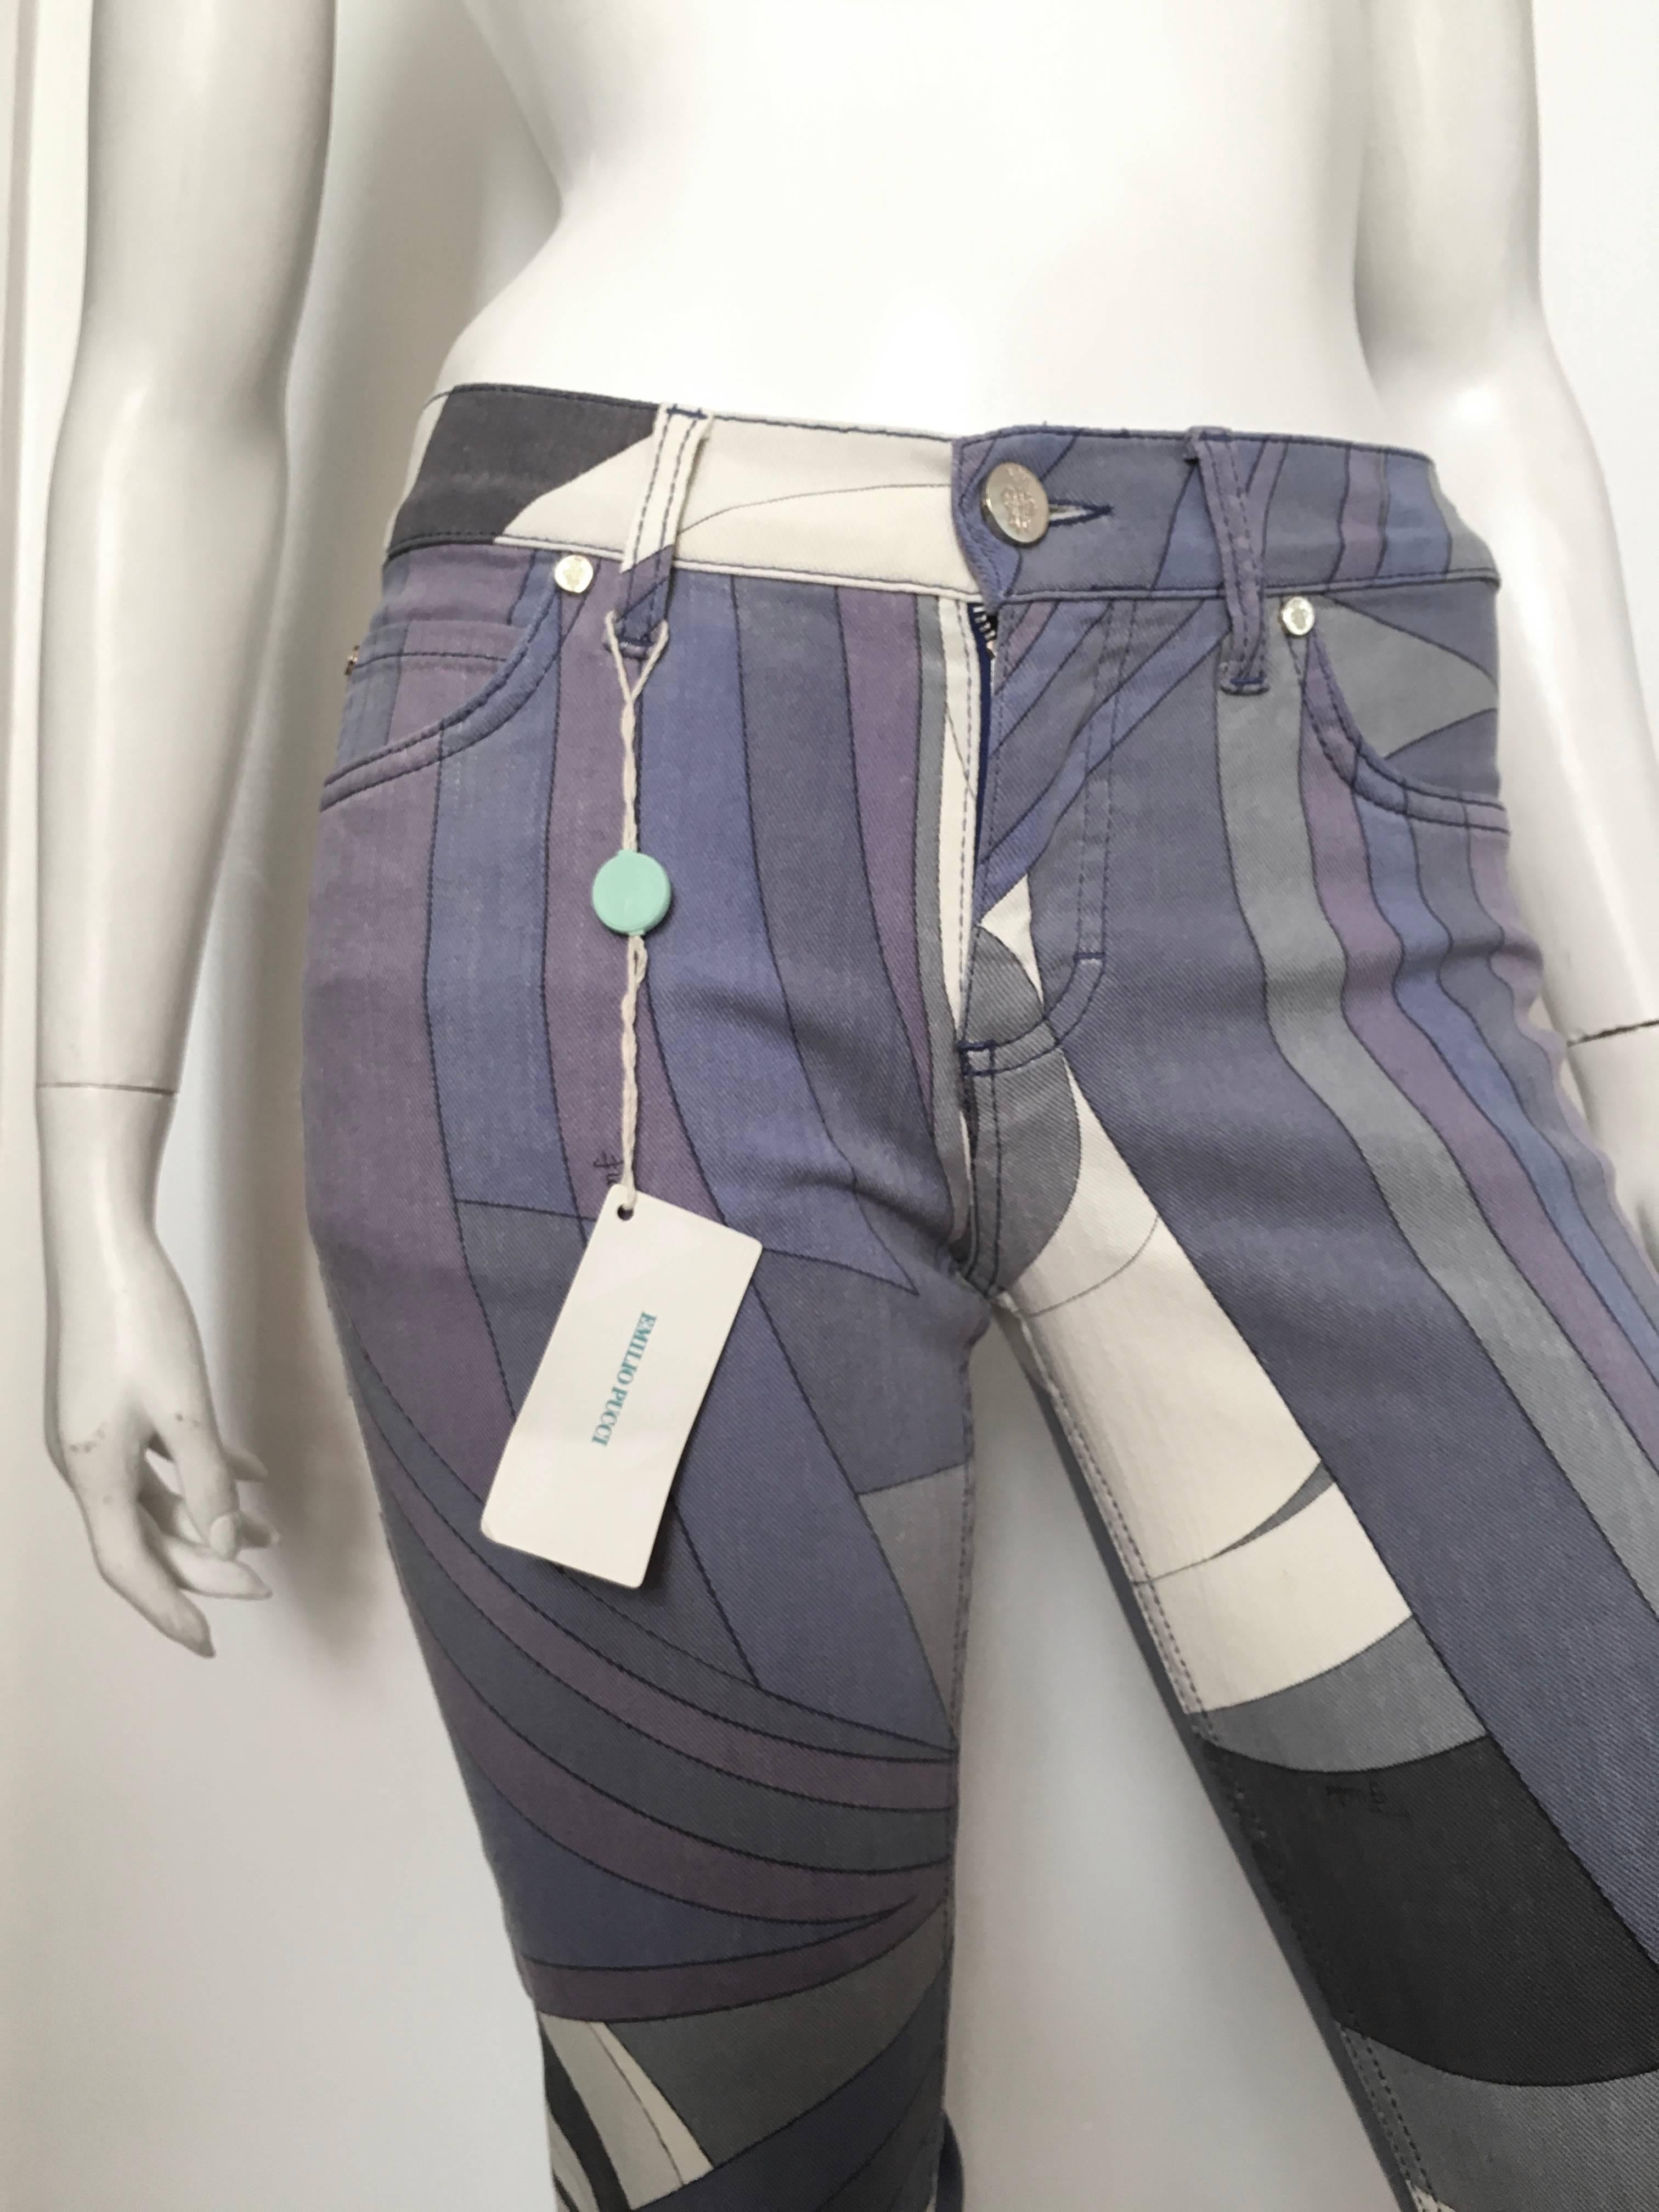 Emilio Pucci iconic whimsical pattern cotton stretch skinny jeans is labeled an USA size 6 and an Italian size 40 but fits like an USA size 4. Matilda the Mannequin is a true size 4 and these are skin tight on her. If these are a size 6 then I'm